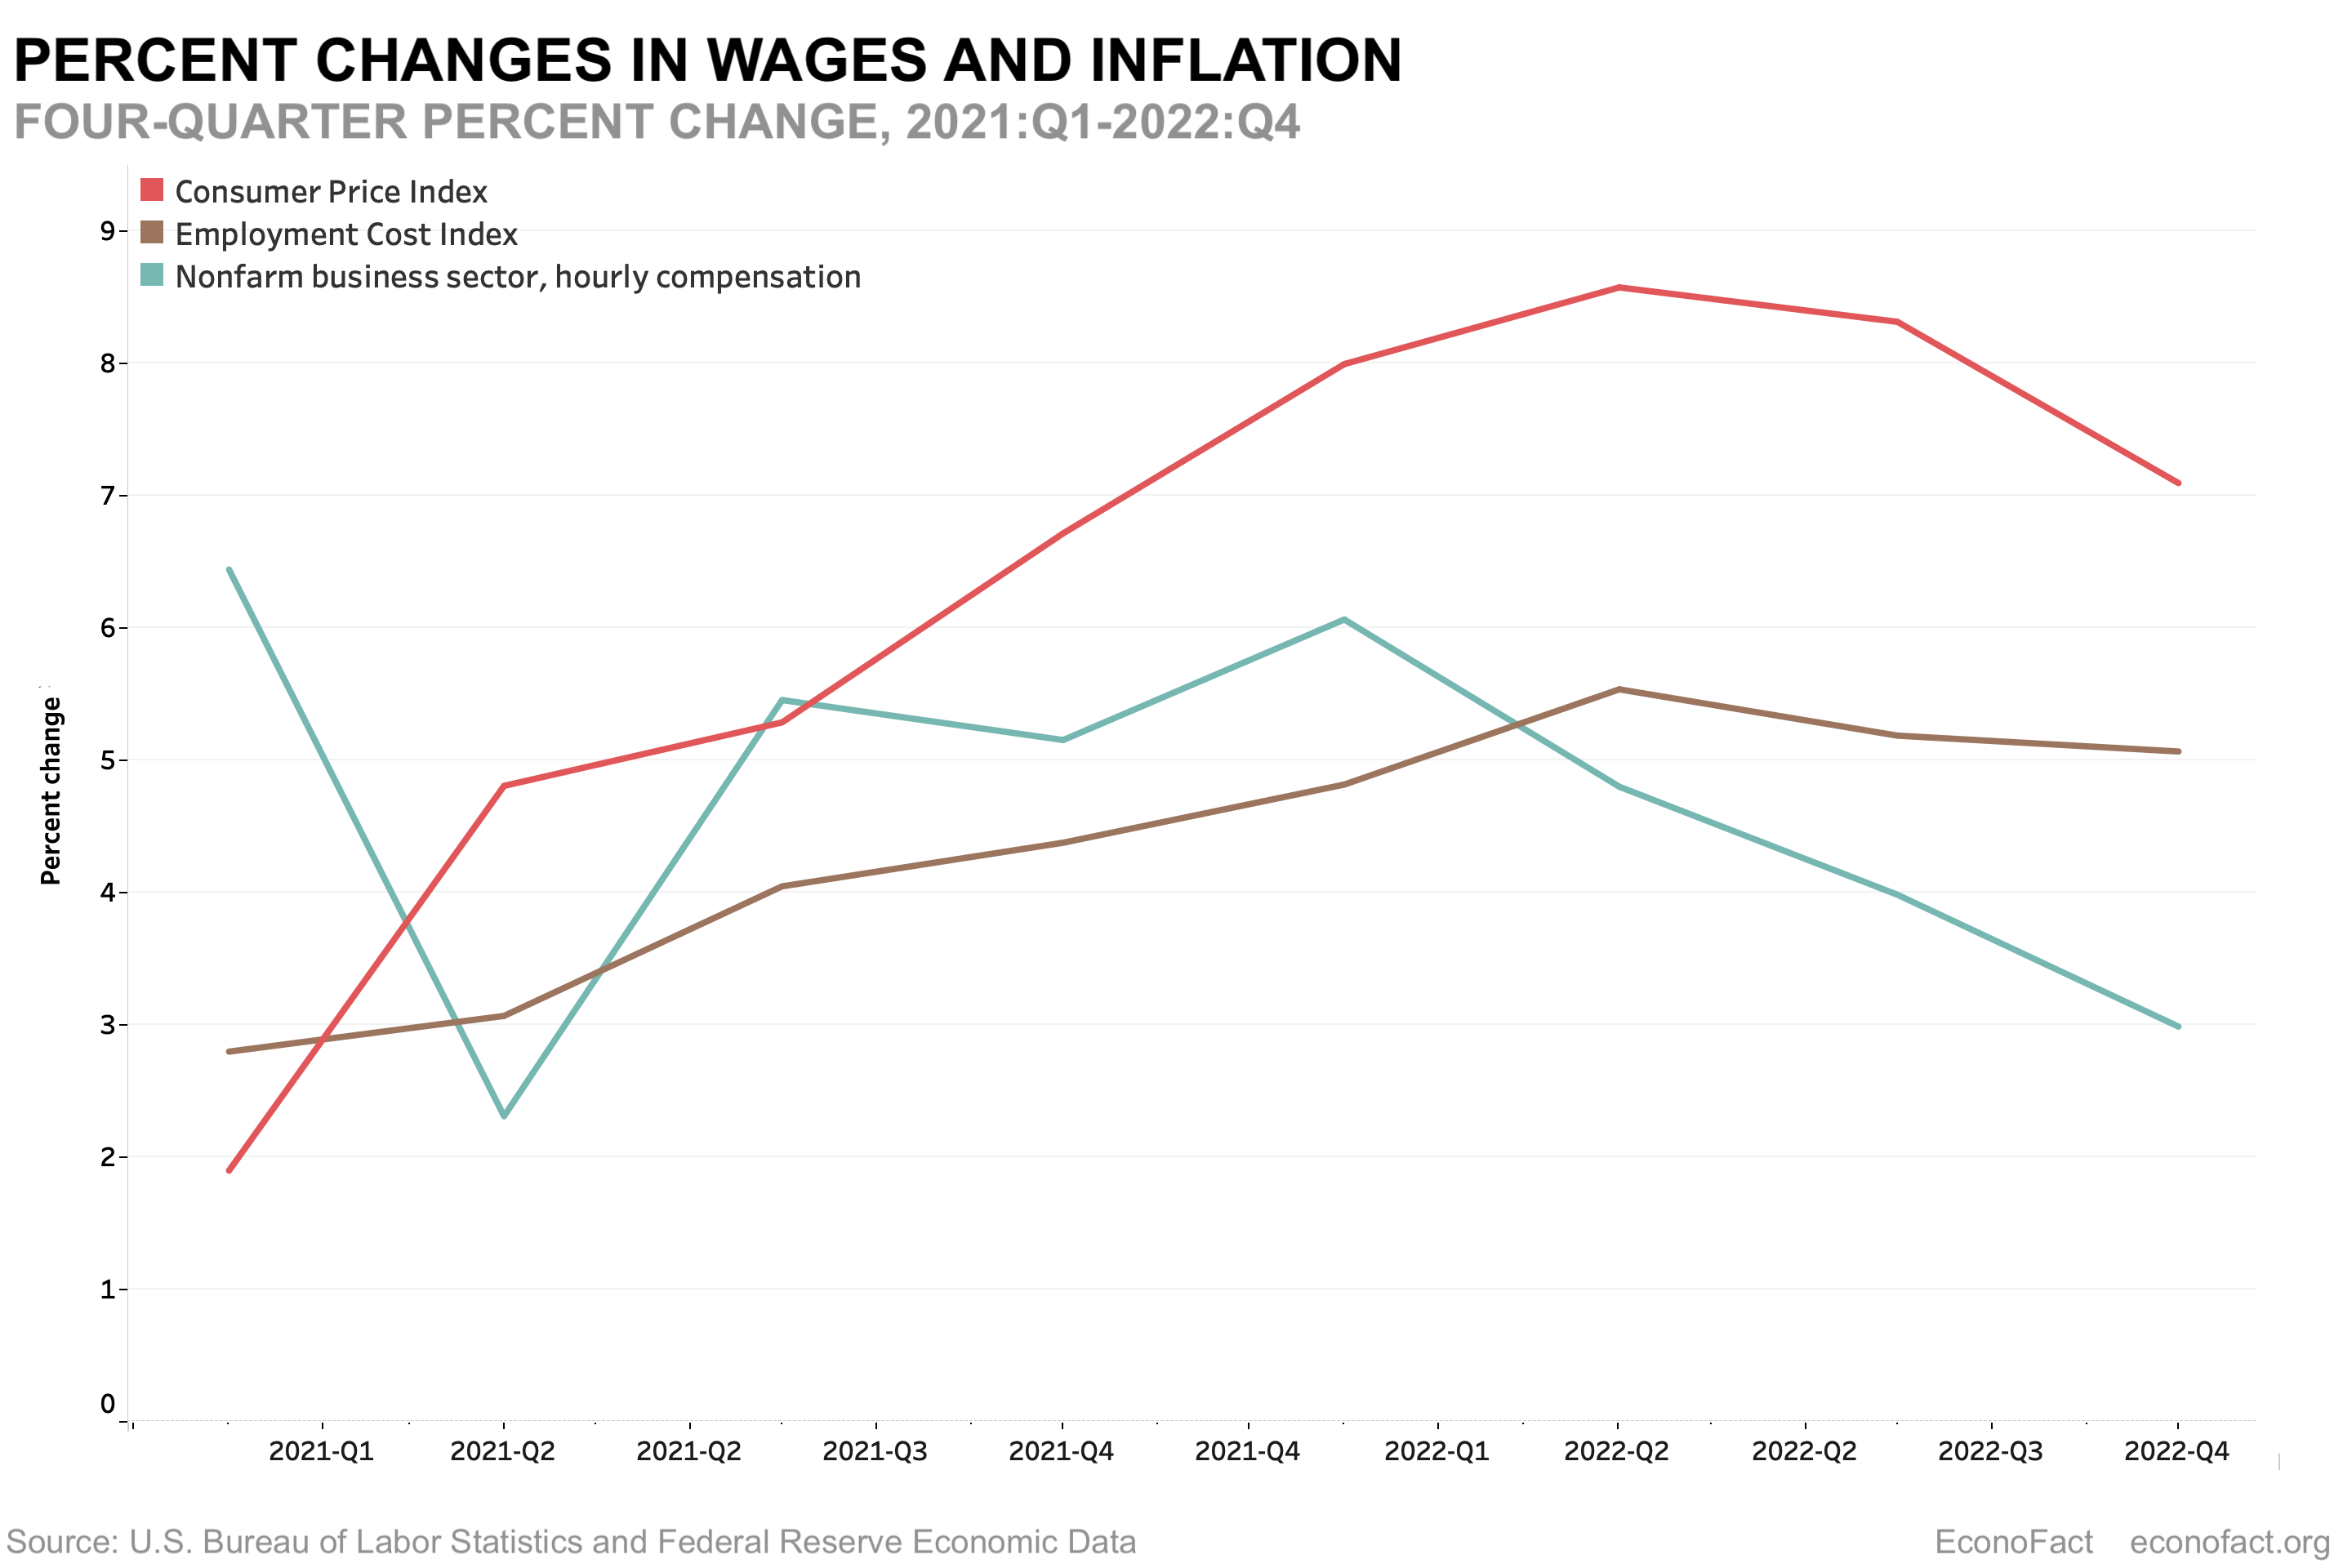 Graph of percent changes in wages and inflation by quarter. Compensation in nonfarm business sectors displayed fluctuations in positive percent change. Consumer price index and employment cost index steadily increased in percent change over time.